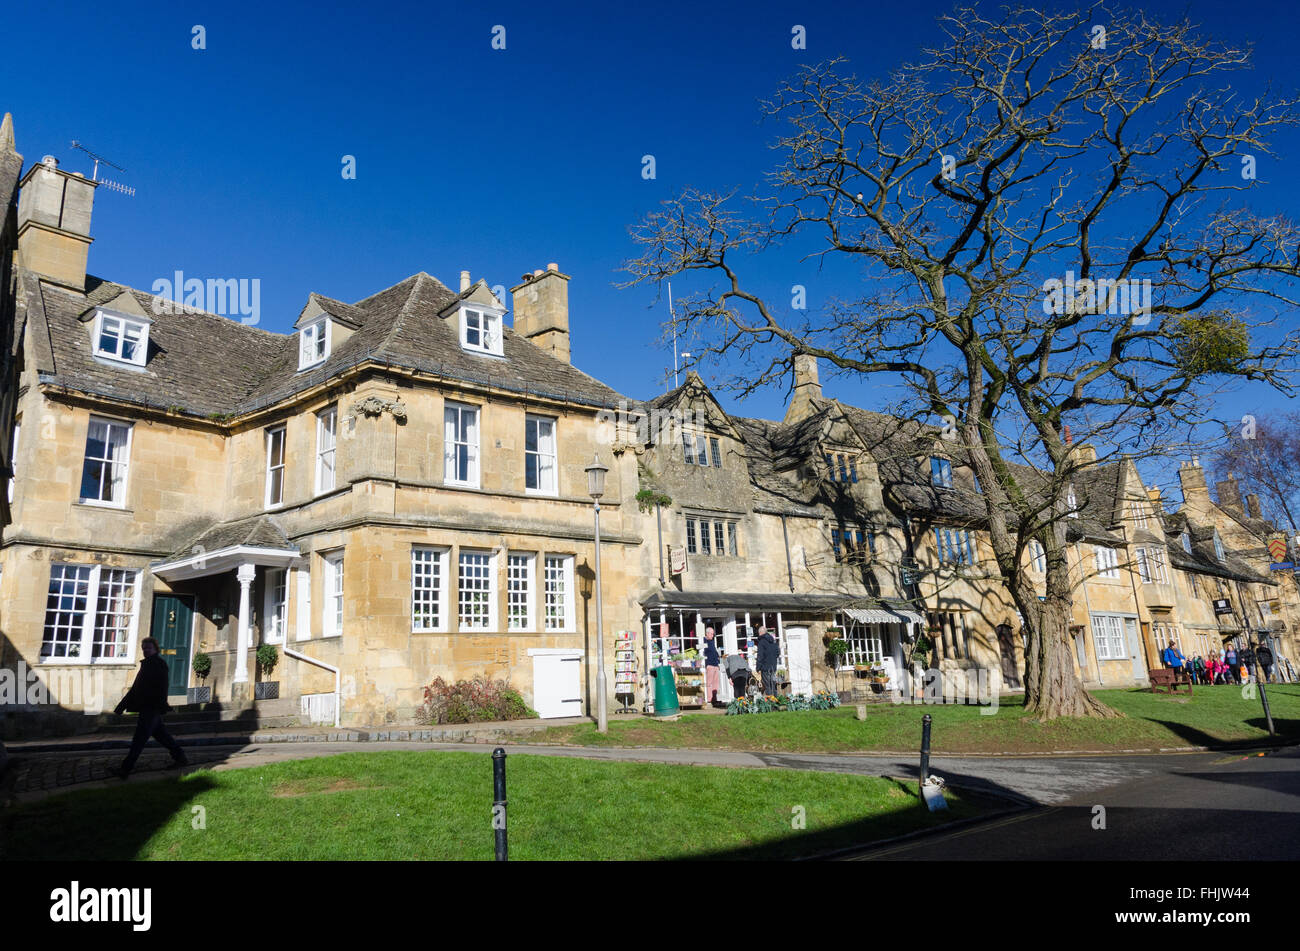 Shops in Chipping Campden High Street, Cotswolds Stock Photo